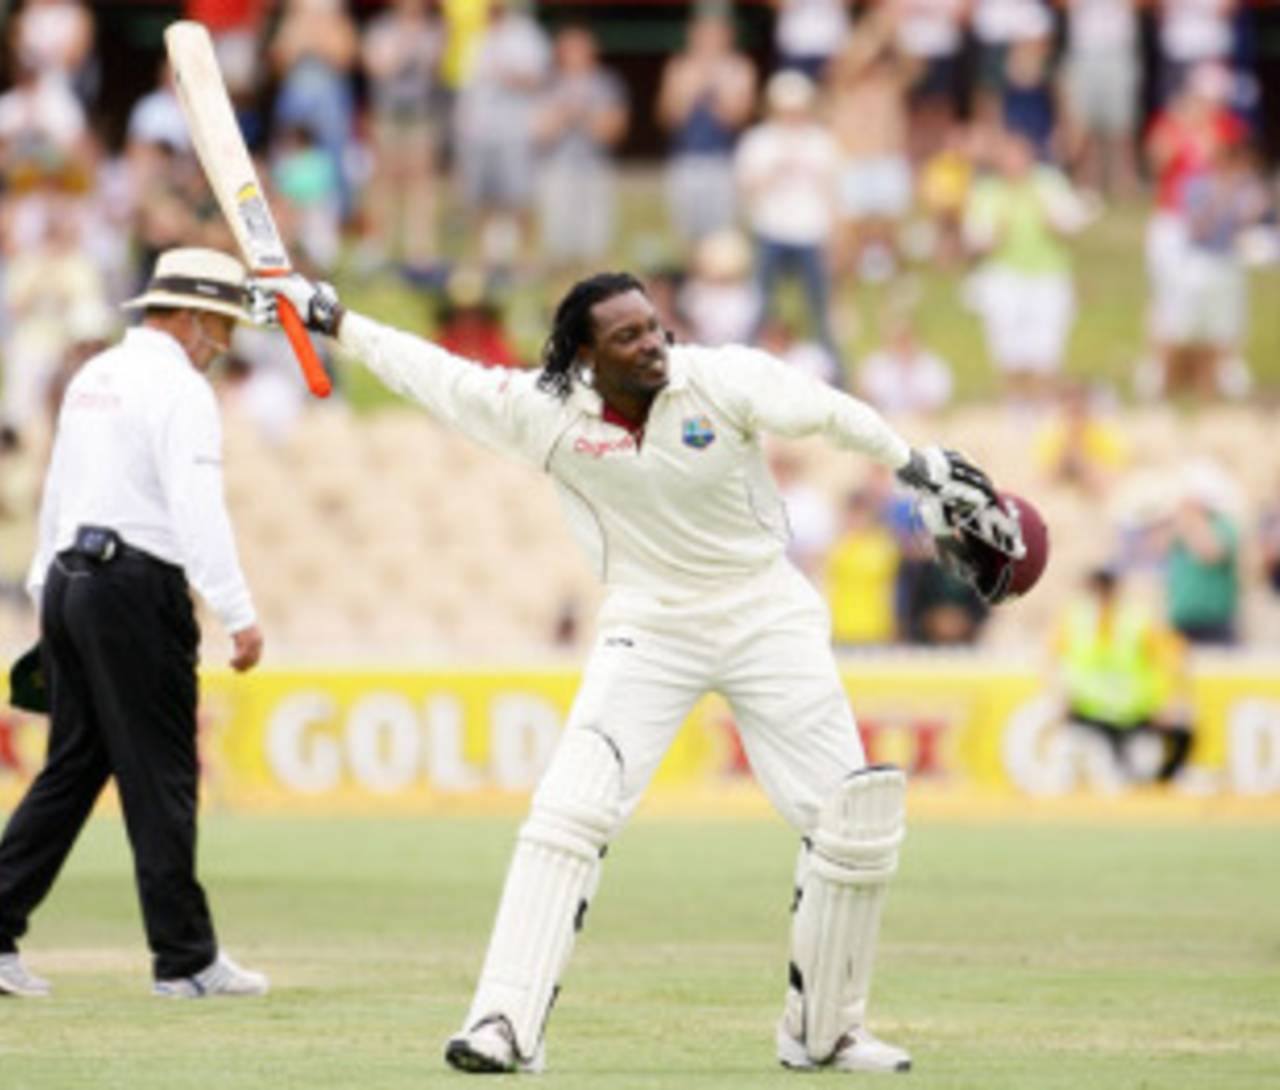 Chris Gayle gets in the swing after reaching three figures, Australia v West Indies, 2nd Test, Adelaide